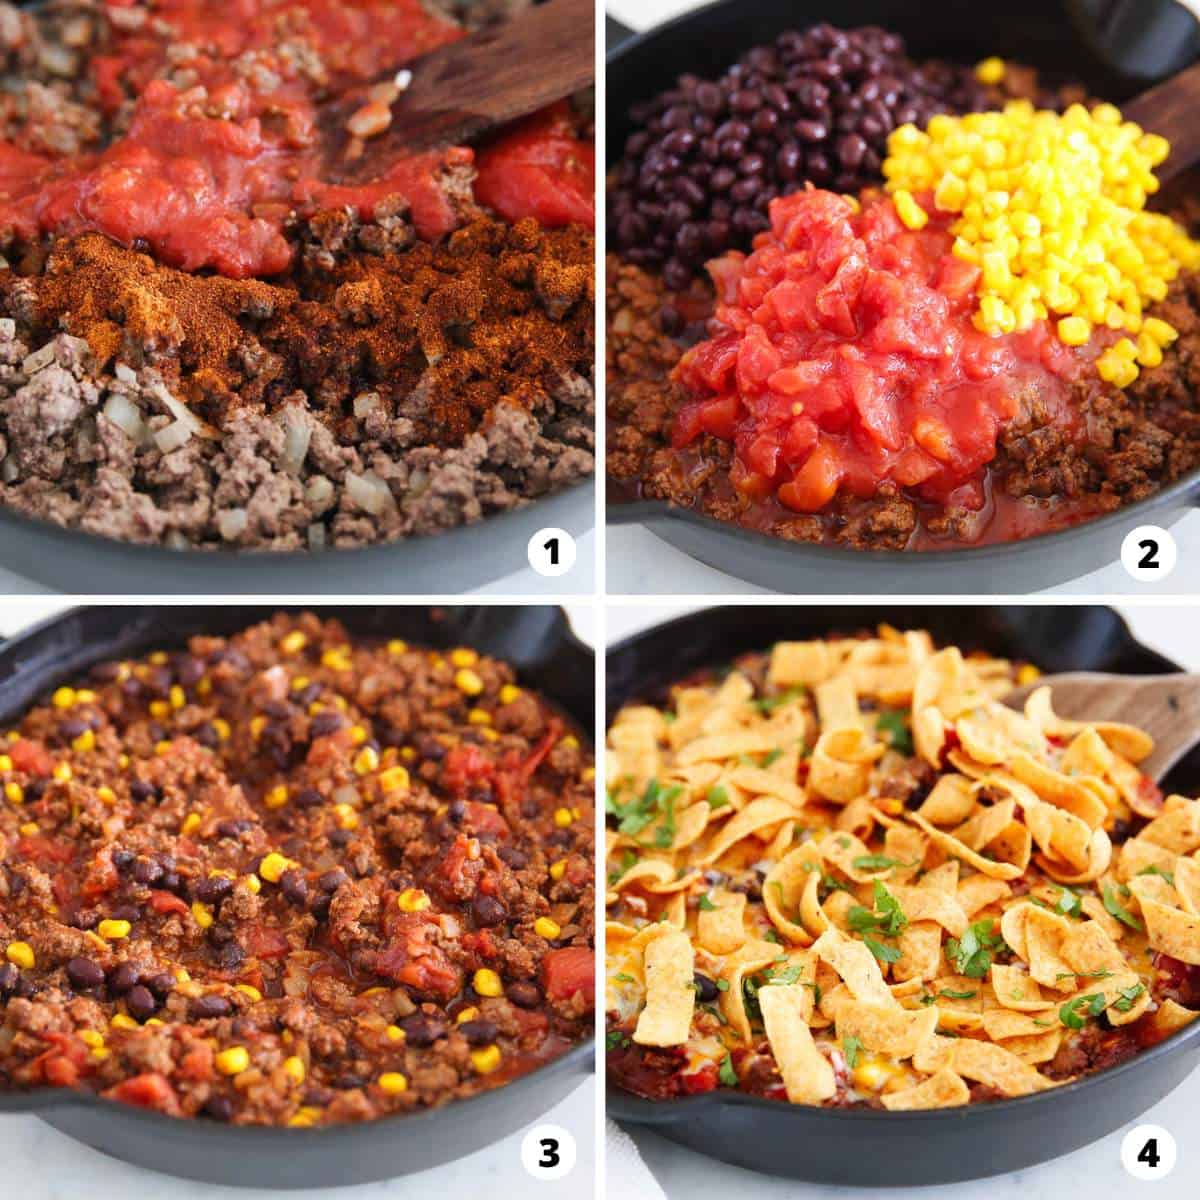 Showing how to make frito pie in a 4 step collage.